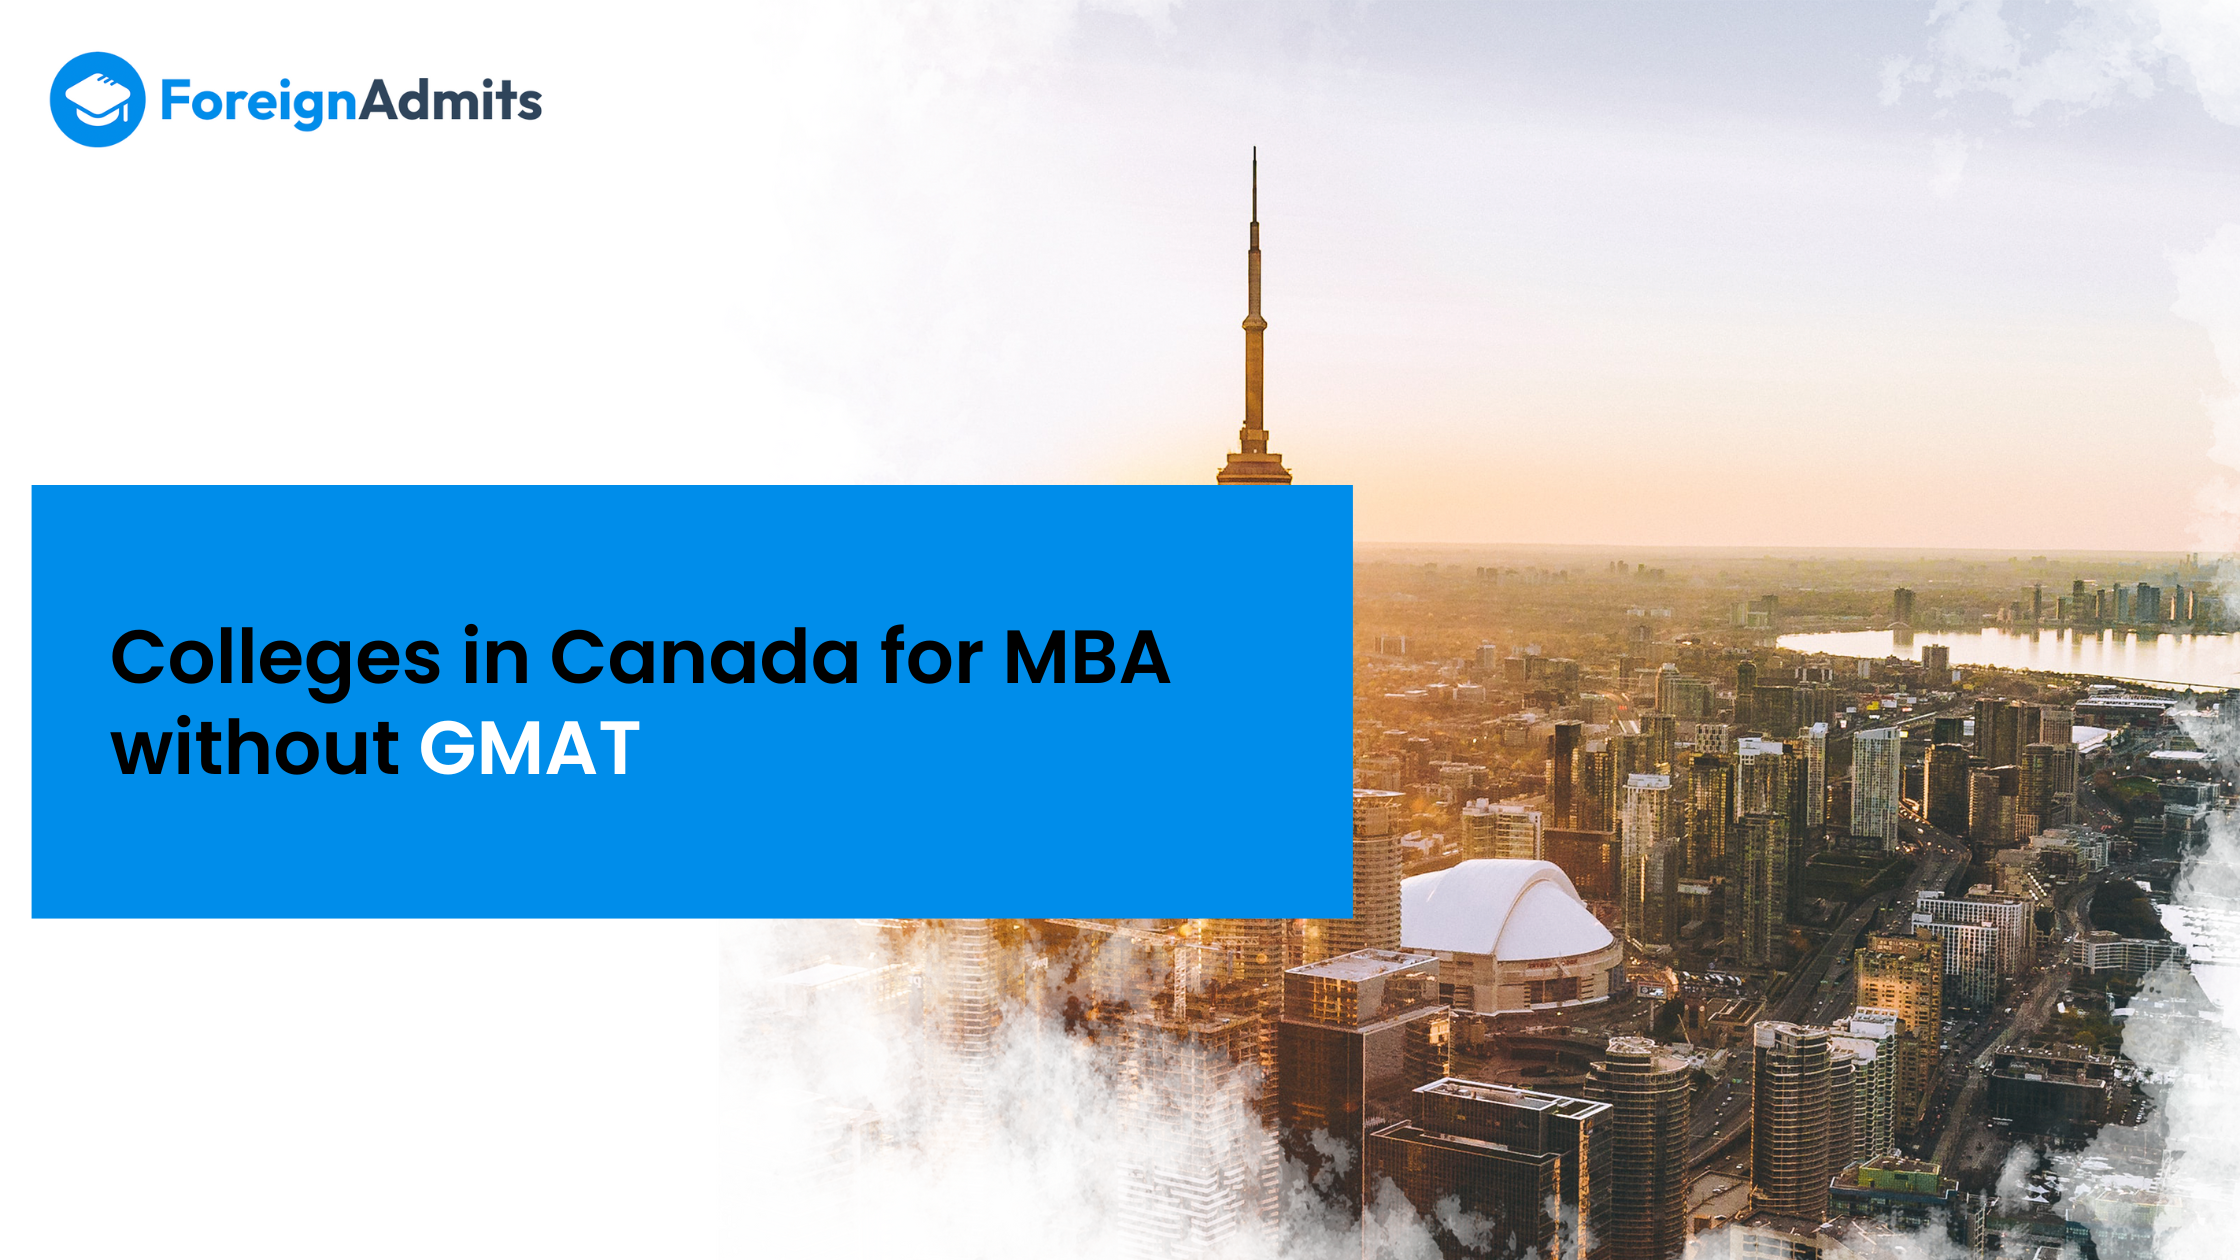 Colleges in Canada for MBA without GMAT